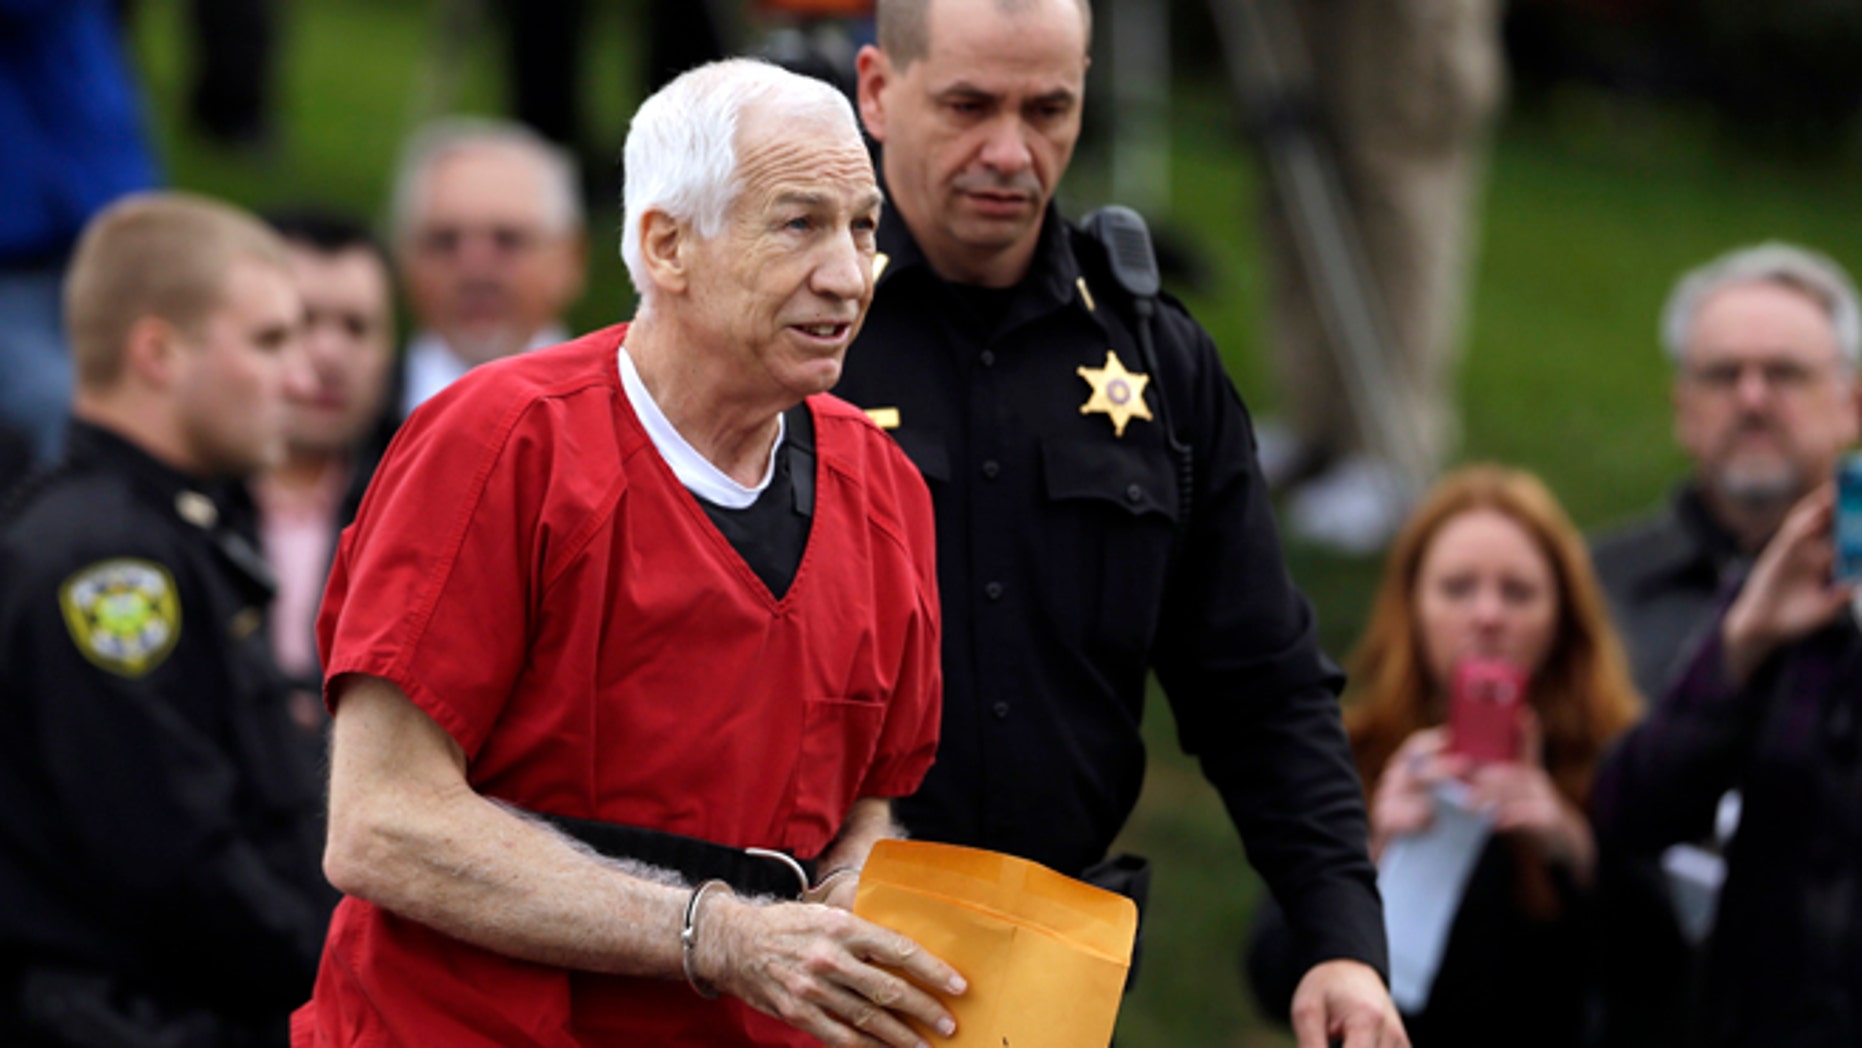 Jerry Sandusky Transferred From County Jail To State Prison To Serve 30